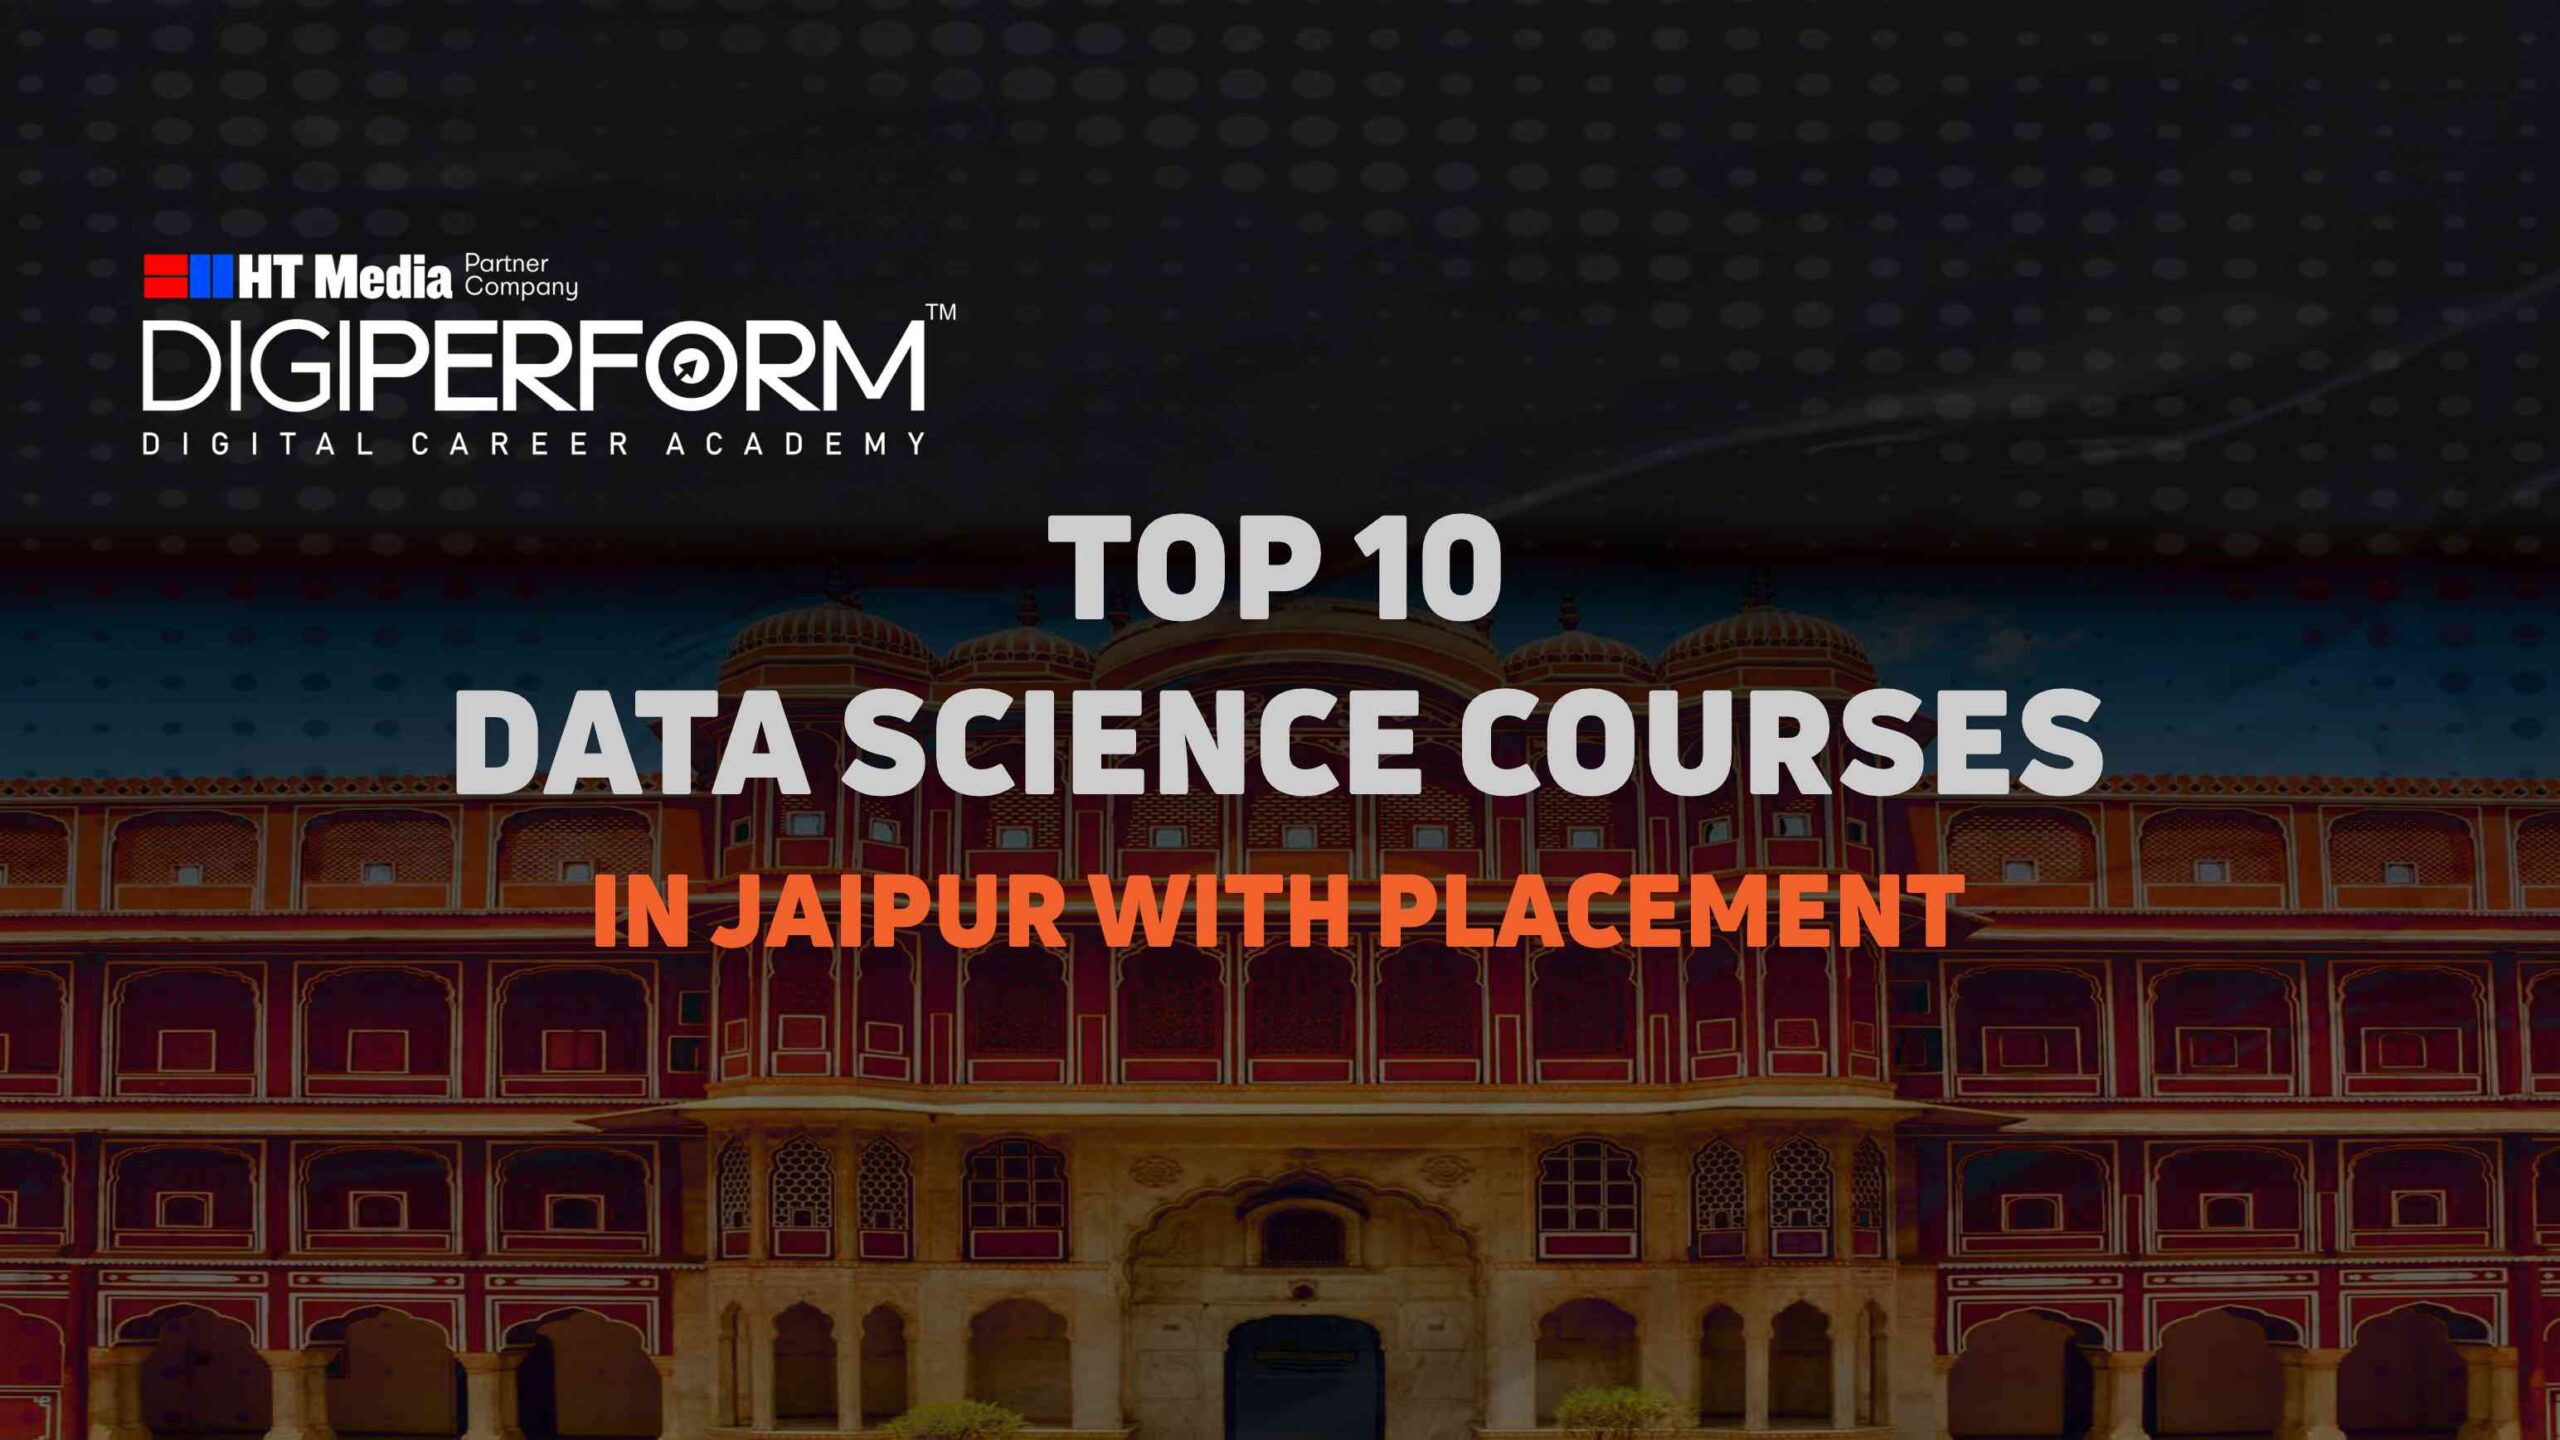 Top 10 Data Science Courses in Jaipur with Placements